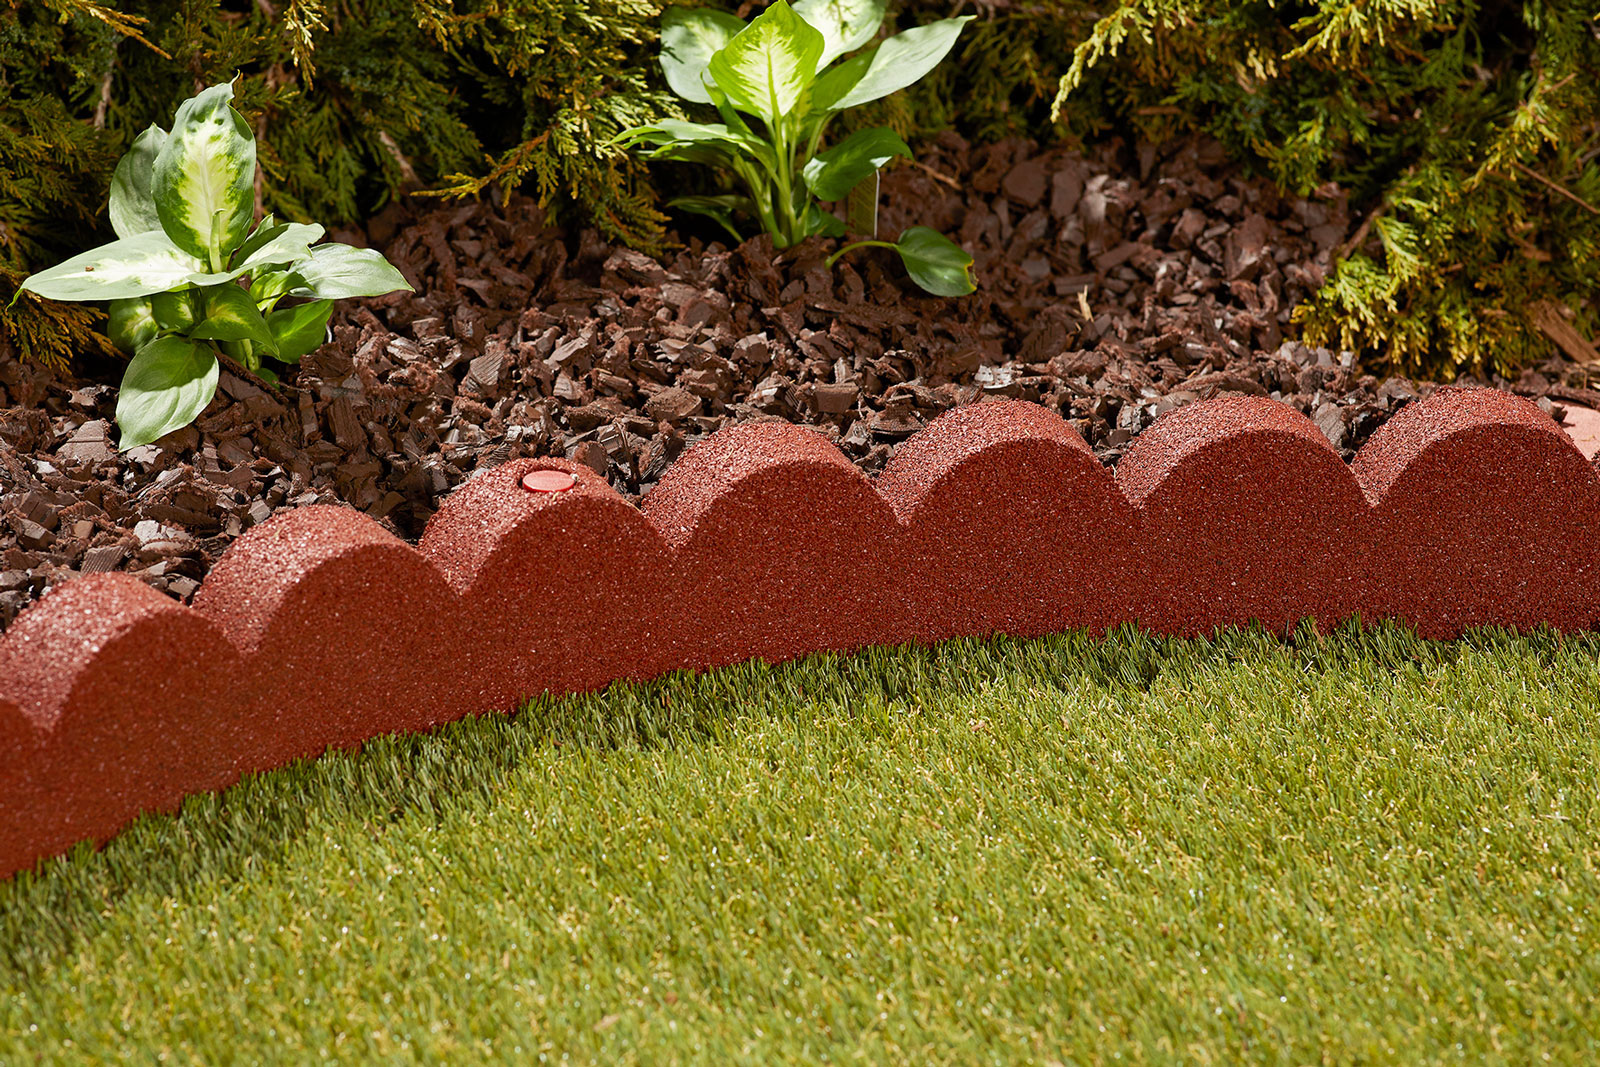 Scalloped edging in landscaping.